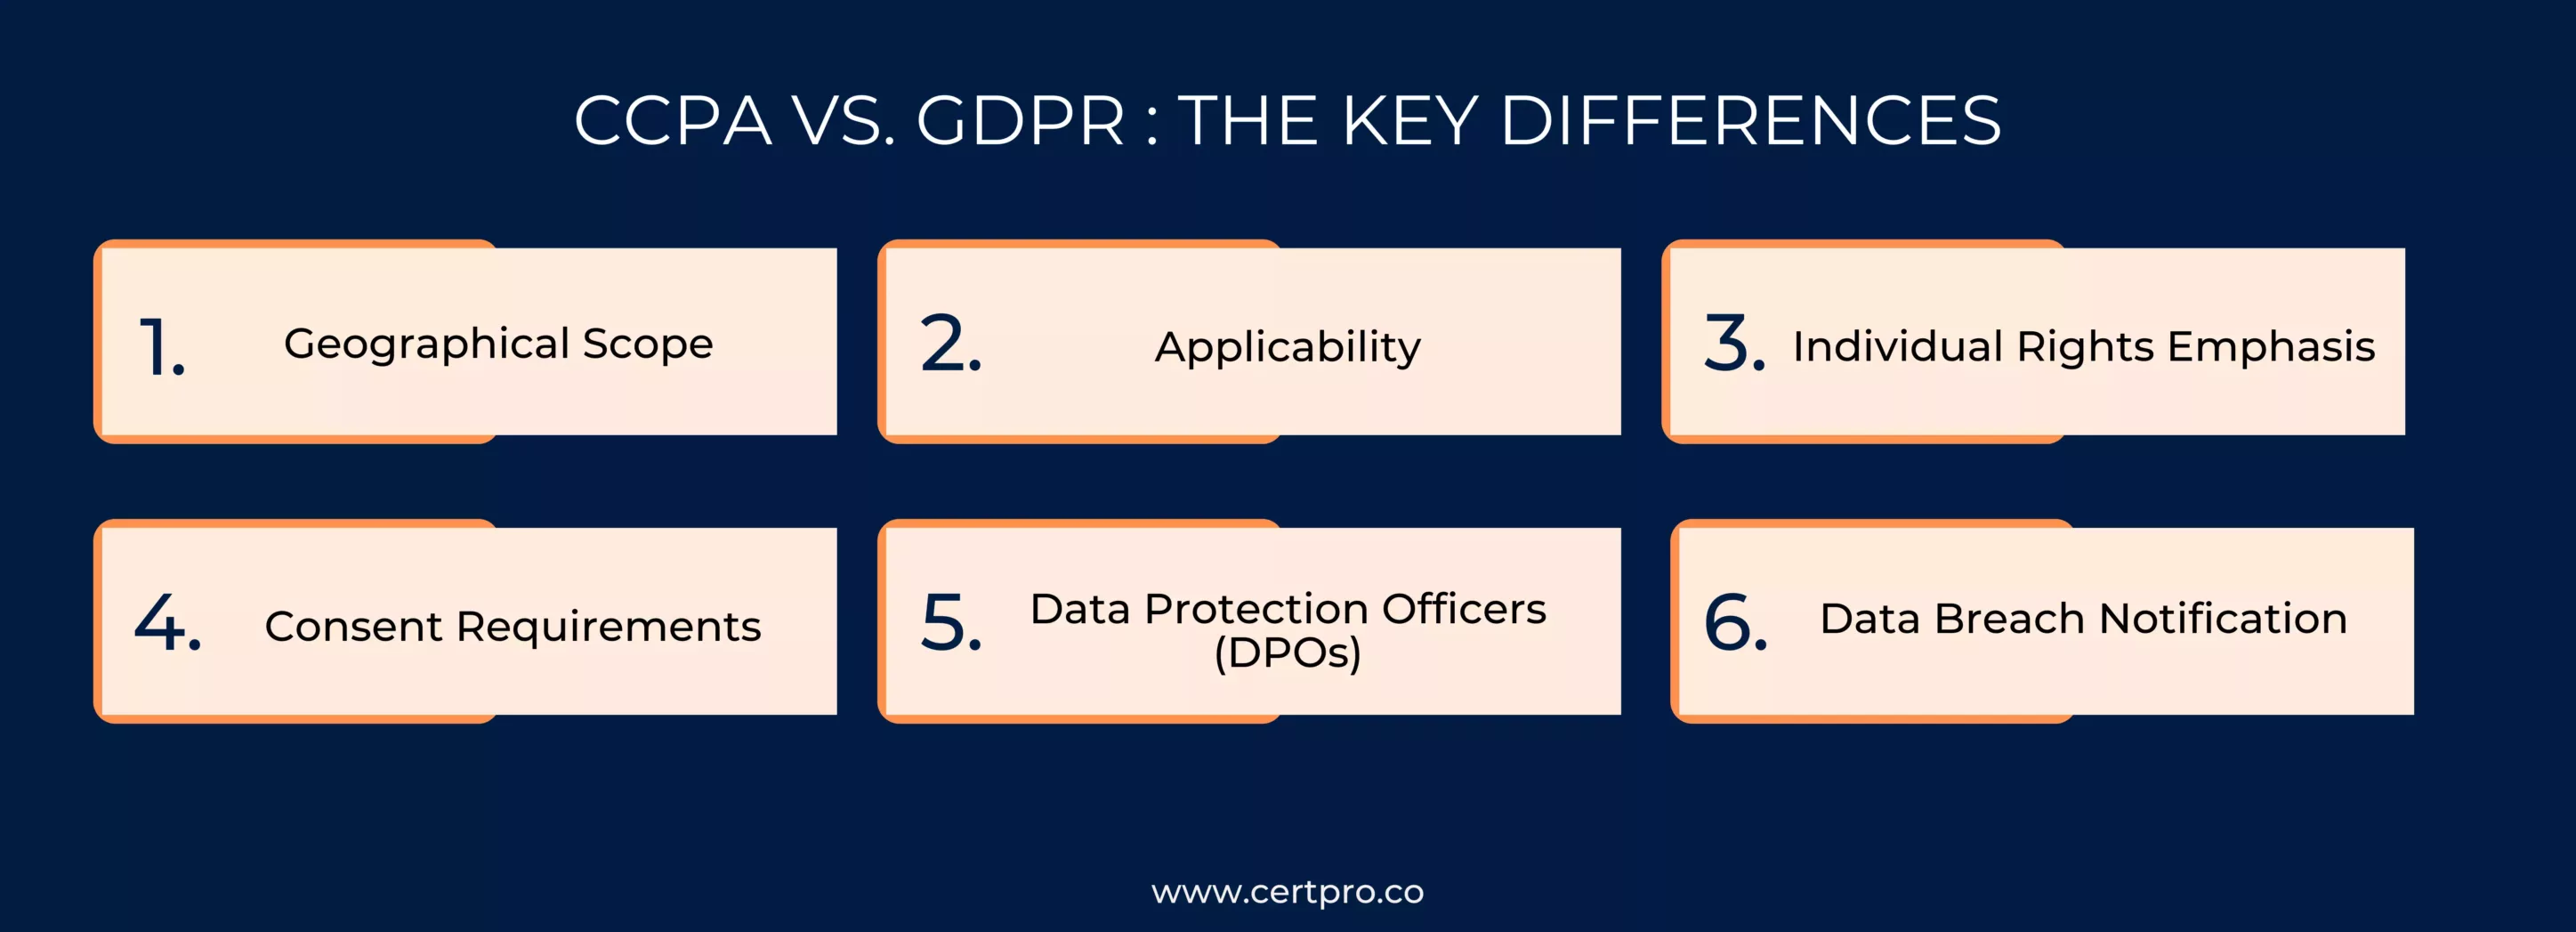 CCPA VS. GDPR The key differences